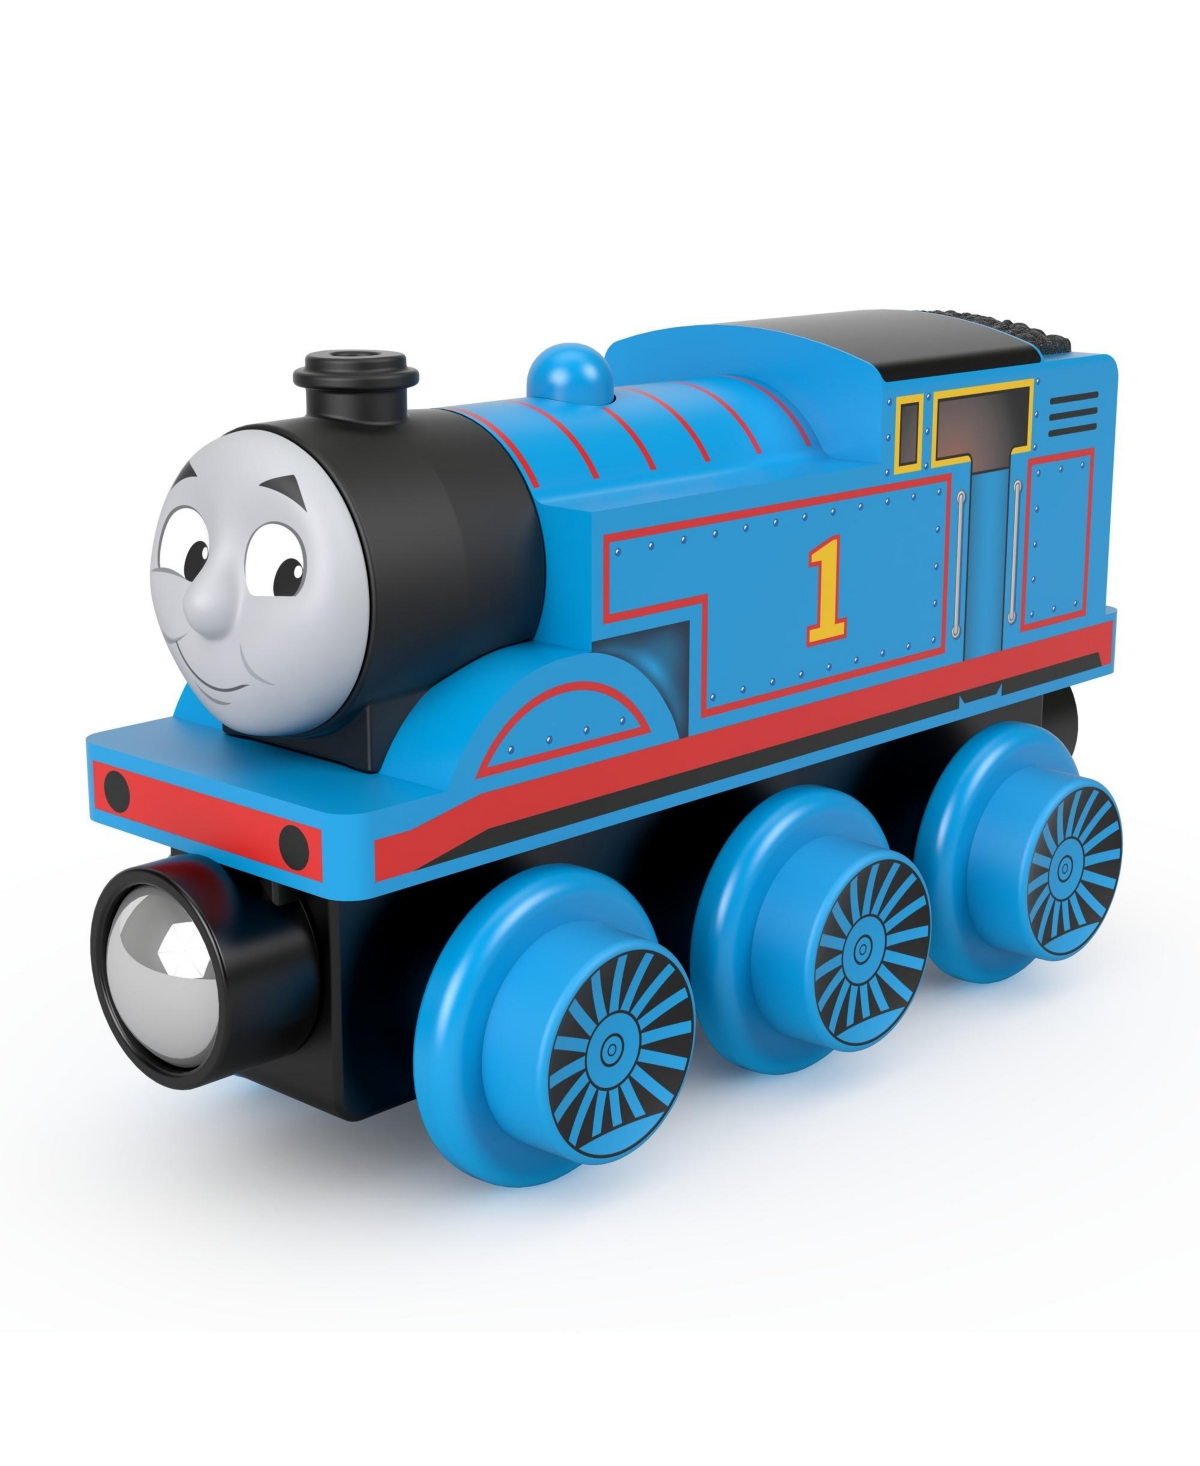 Fisher Price Babies' Fisher-price Thomas & Friends Wooden Railway Thomas Engine In Multi